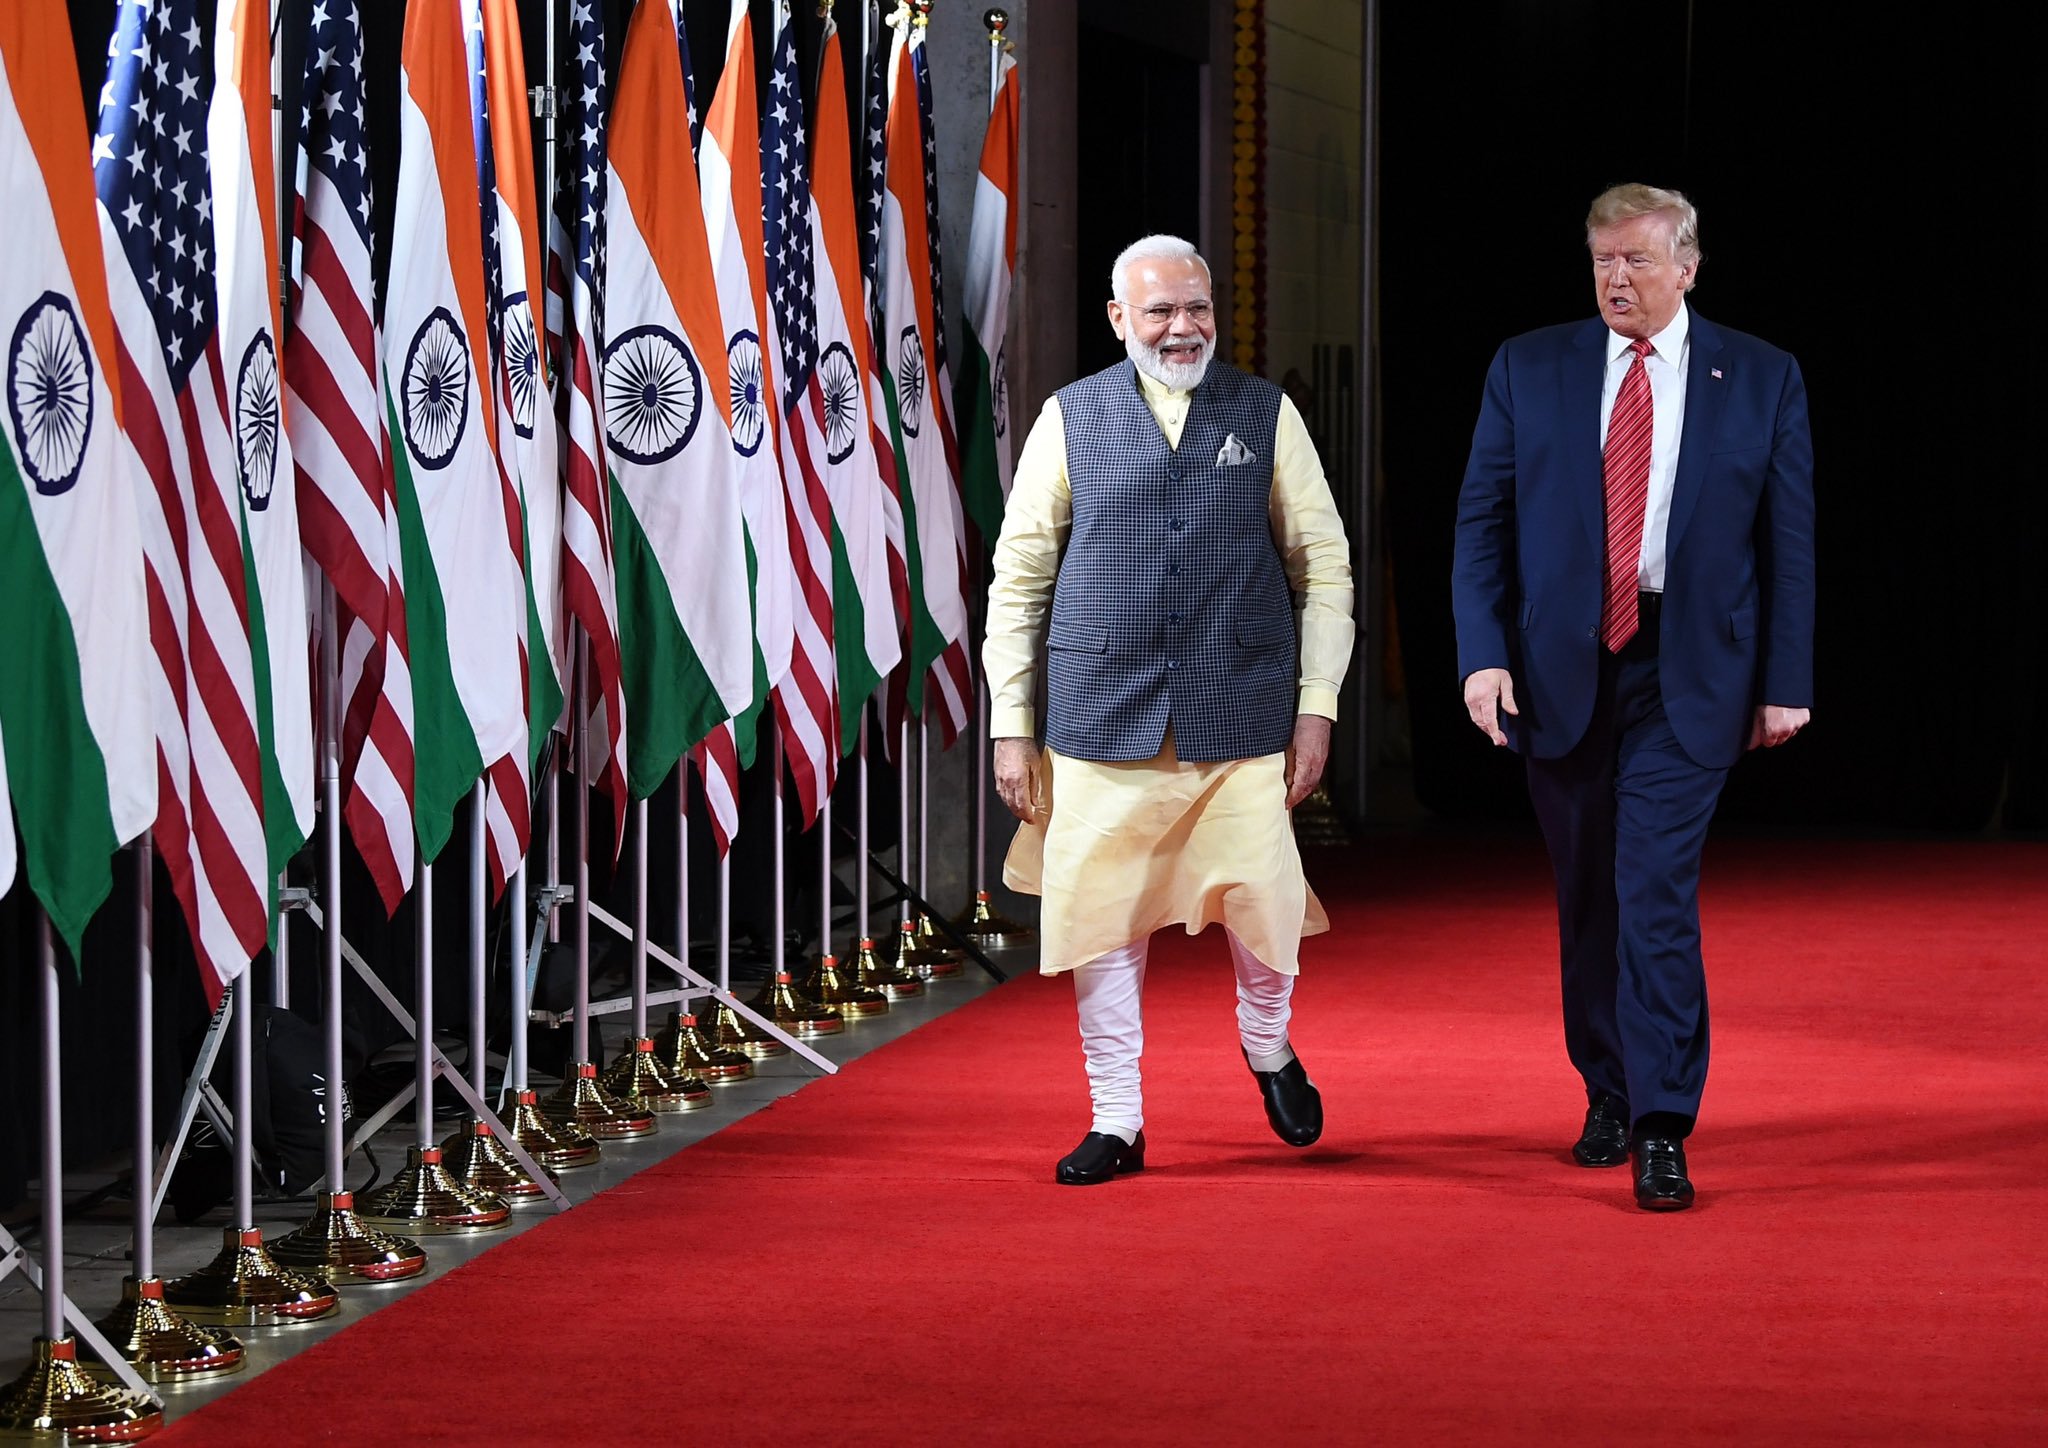 Highlights of Howdy Modi in Houston - Trump Says The USA Loves India